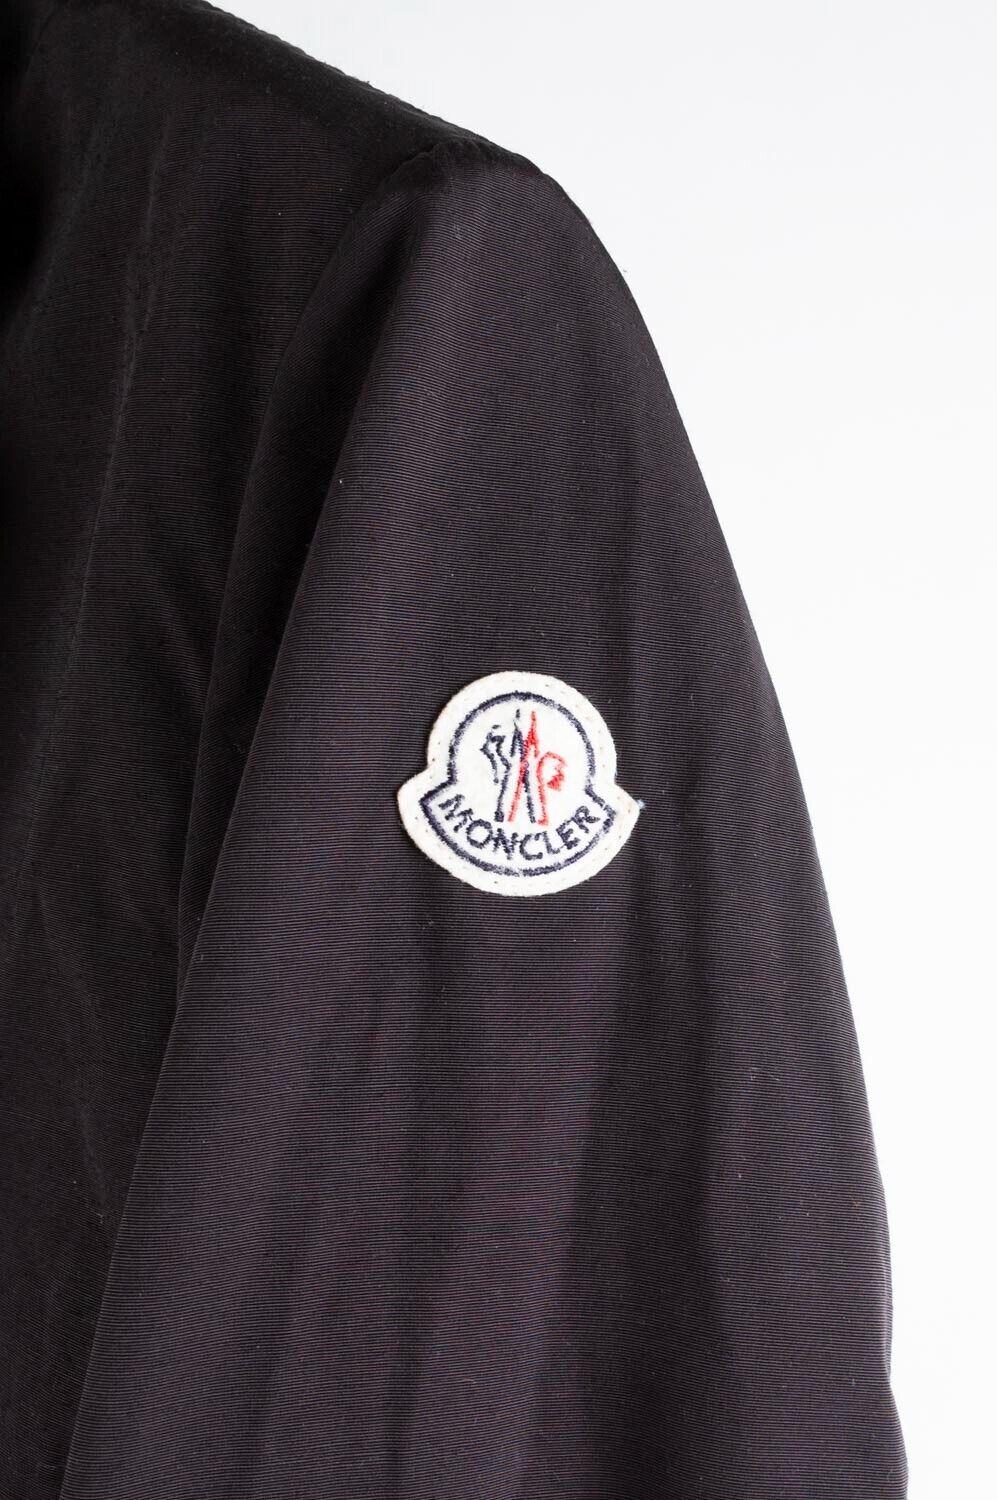 100% genuine Moncler Leopold Nylon Men Jacket, S347
Color: Black
Material: 100% polyamide/nylon
Tag size: 3 (M/L)
This jacket is great quality item. Rate 8 of 10, good used condition, some signs of use.
Actual measurements